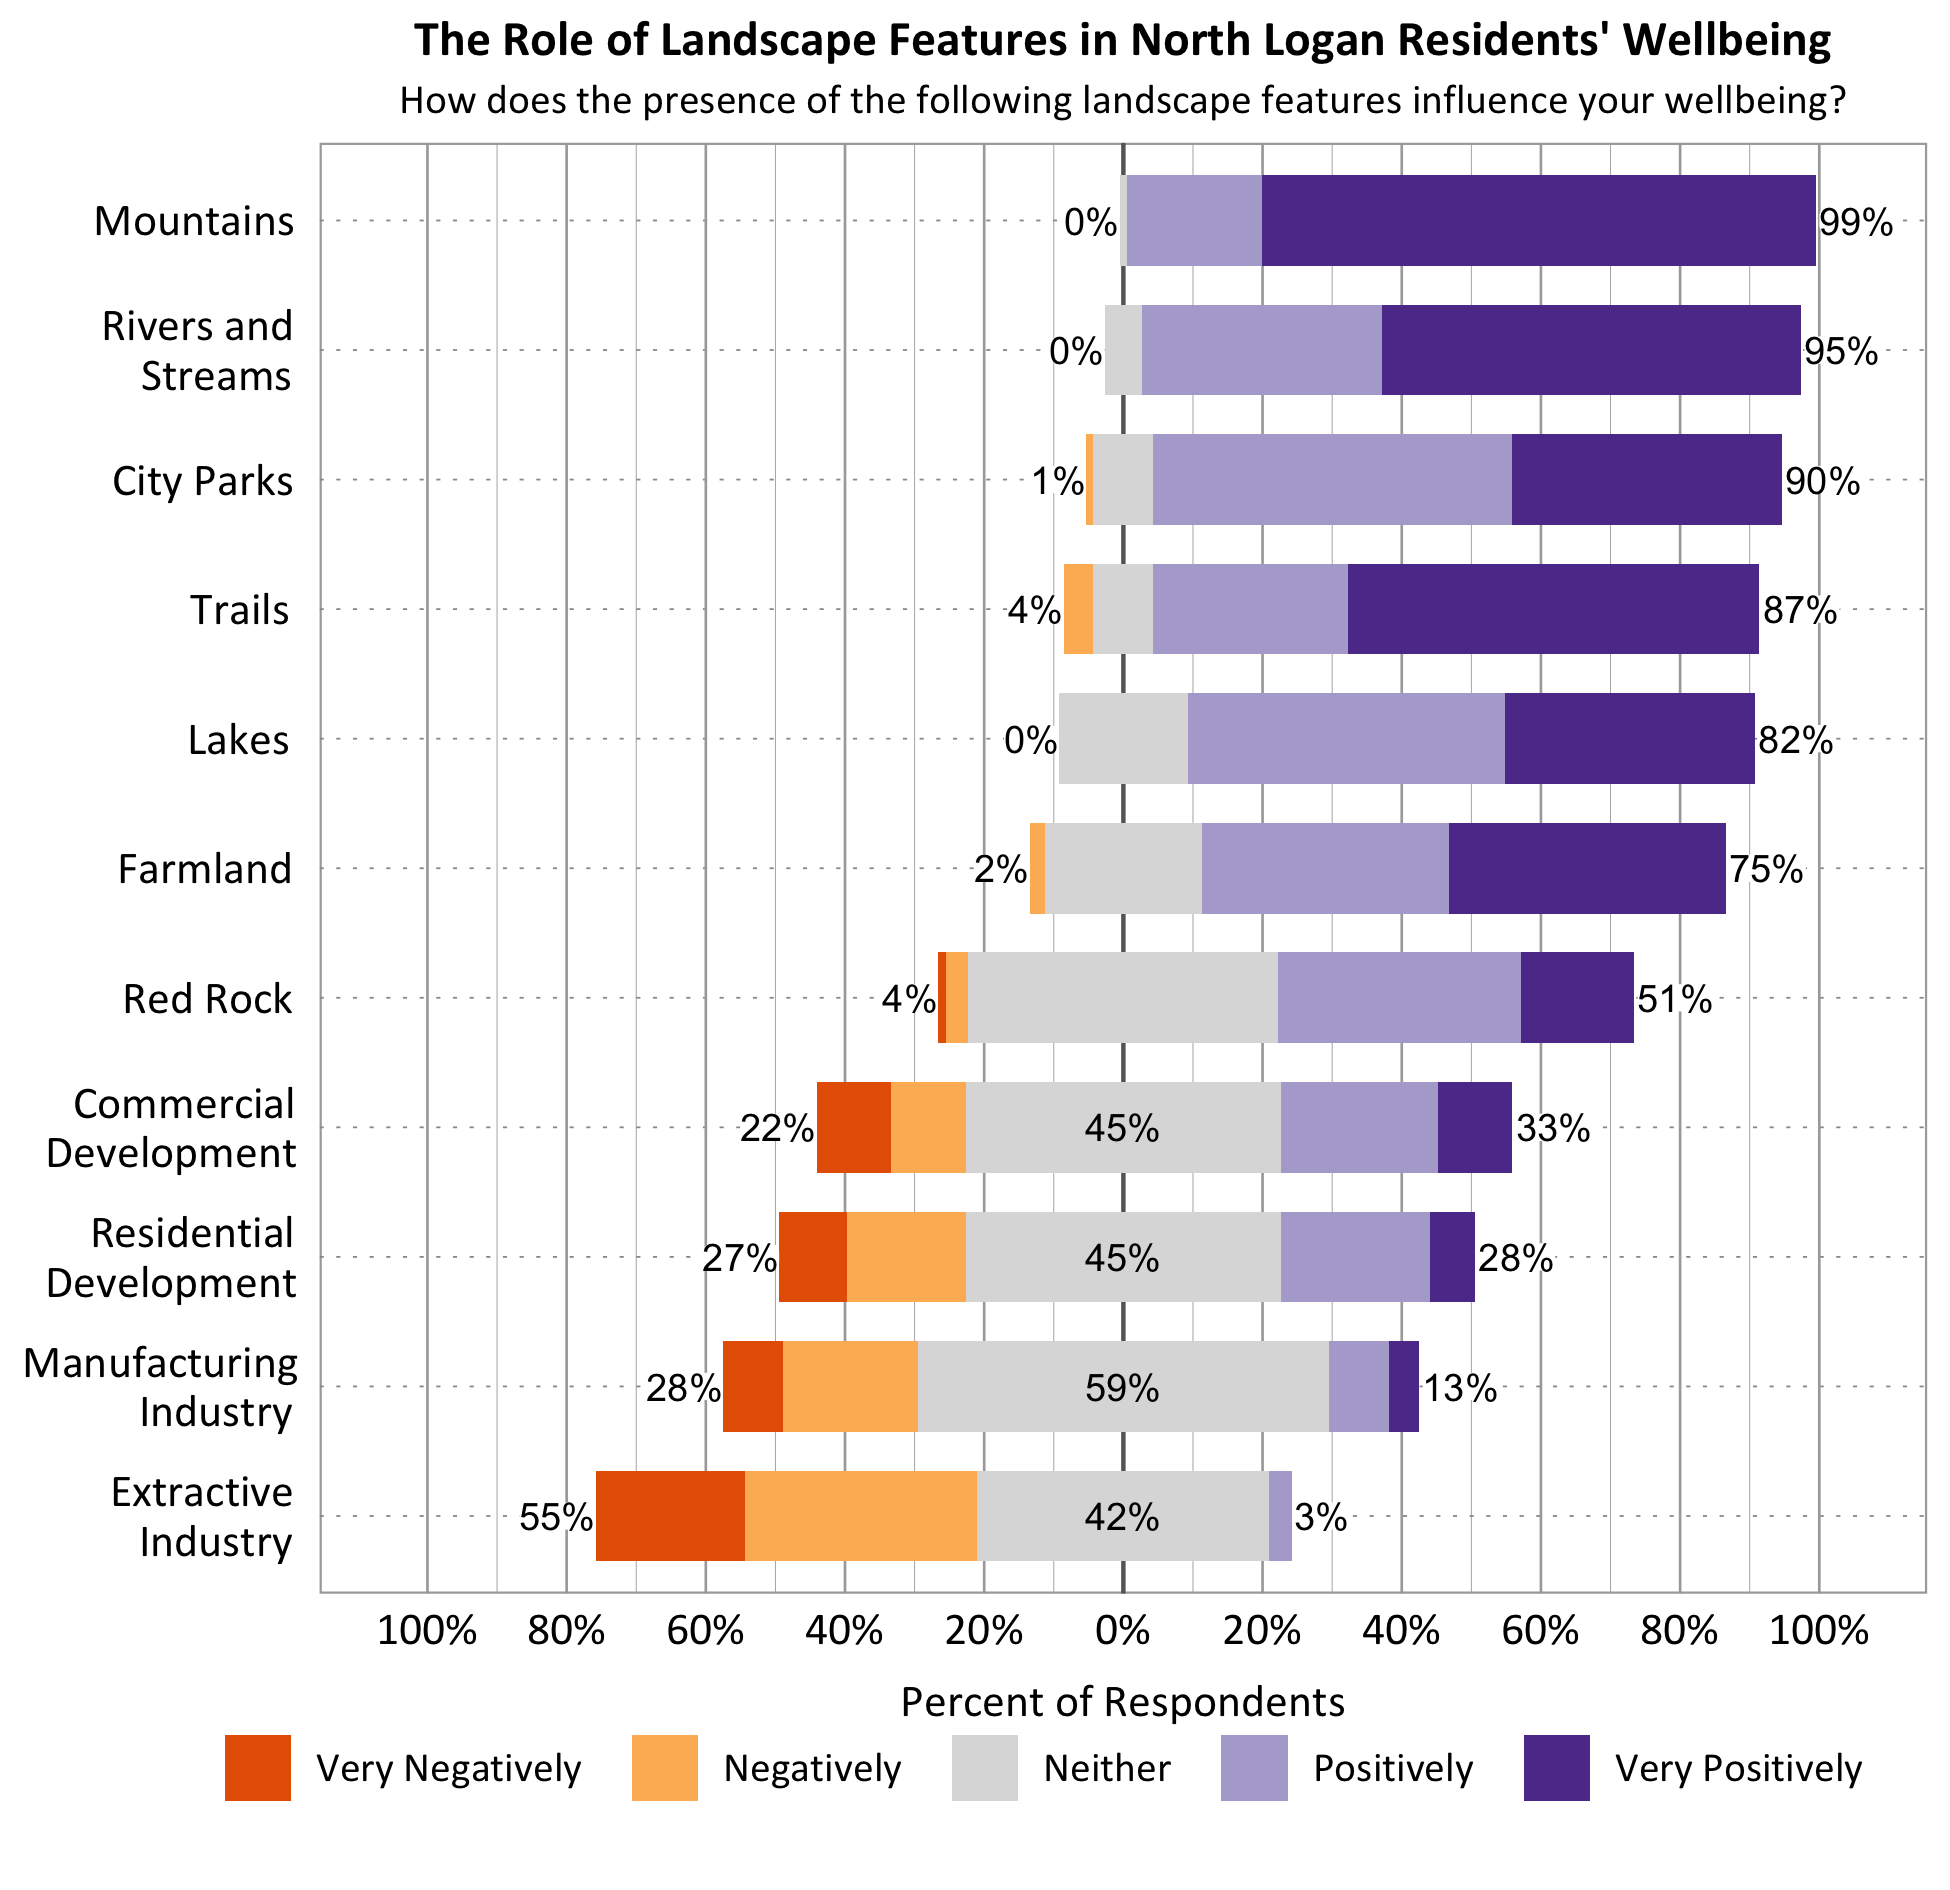 Likert Graph. Title: The Role of Landscape Features in North Logan Residents' Wellbeing. Subtitle: How does the presence of the following landscape features influence your wellbeing? Feature: Mountains - 0% of respondents indicated very negatively or negatively, 1% indicated neither, 99% indicated positively or very positively; Feature: Rivers and Streams - 0% of respondents indicated very negatively or negatively, 5% indicated neither, 95% indicated positively or very positively; Feature: Lakes - 0% of respondents indicated very negatively or negatively, 18% indicated neither, 82% indicated positively or very positively; Feature: Trails - 4% of respondents indicated very negatively or negatively, 9% indicated neither, 87% indicated positively or very positively; Feature: City Parks - 1% of respondents indicated very negatively or negatively, 9% indicated neither, 90% indicated positively or very positively; Feature: Red Rock - 4% of respondents indicated very negatively or negatively, 45% indicated neither, 51% indicated positively or very positively; Feature: Farmland – 2% of respondents indicated very negatively or negatively, 23% indicated neither, 75% indicated positively or very positively; Commercial Development - 22% of respondents indicated very negatively or negatively, 45% indicated neither, 33% indicated positively or very positively; Feature: Residential Development - 27% of respondents indicated very negatively or negatively, 45% indicated neither, 28% indicated positively or very positively; Feature: Feature: Manufacturing Industry - 28% of respondents indicated very negatively or negatively, 59% indicated neither, 13% indicated positively or very positively; Feature: Extractive Industry - 55% of respondents indicated very negatively or negatively, 42% indicated neither, 3% indicated positively or very positively.